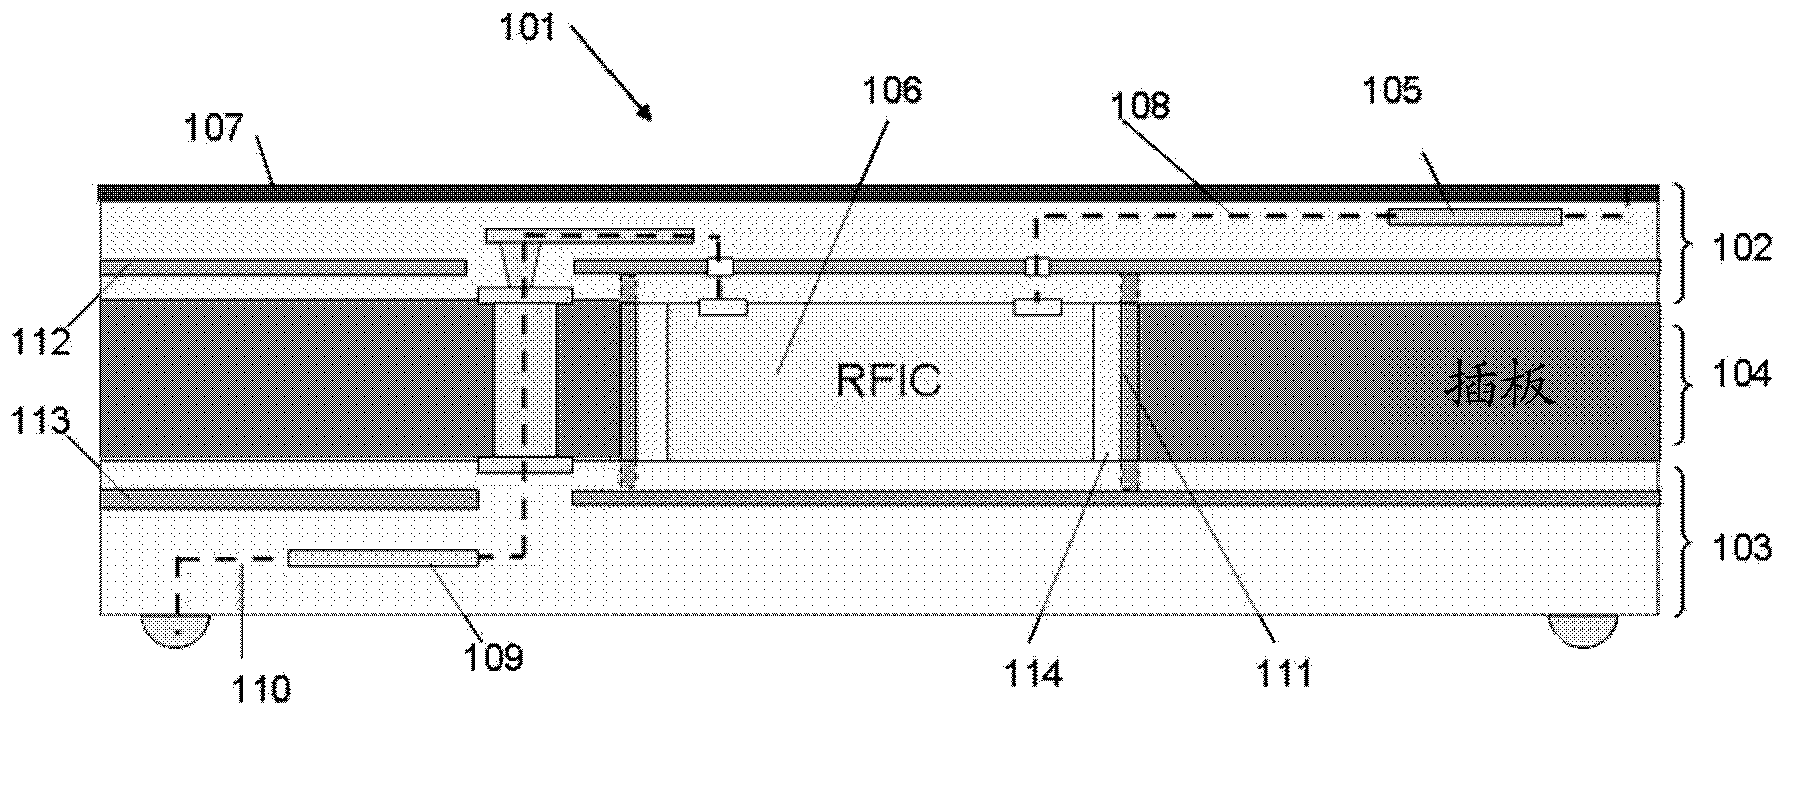 Separation mixed substrate for radio frequency application